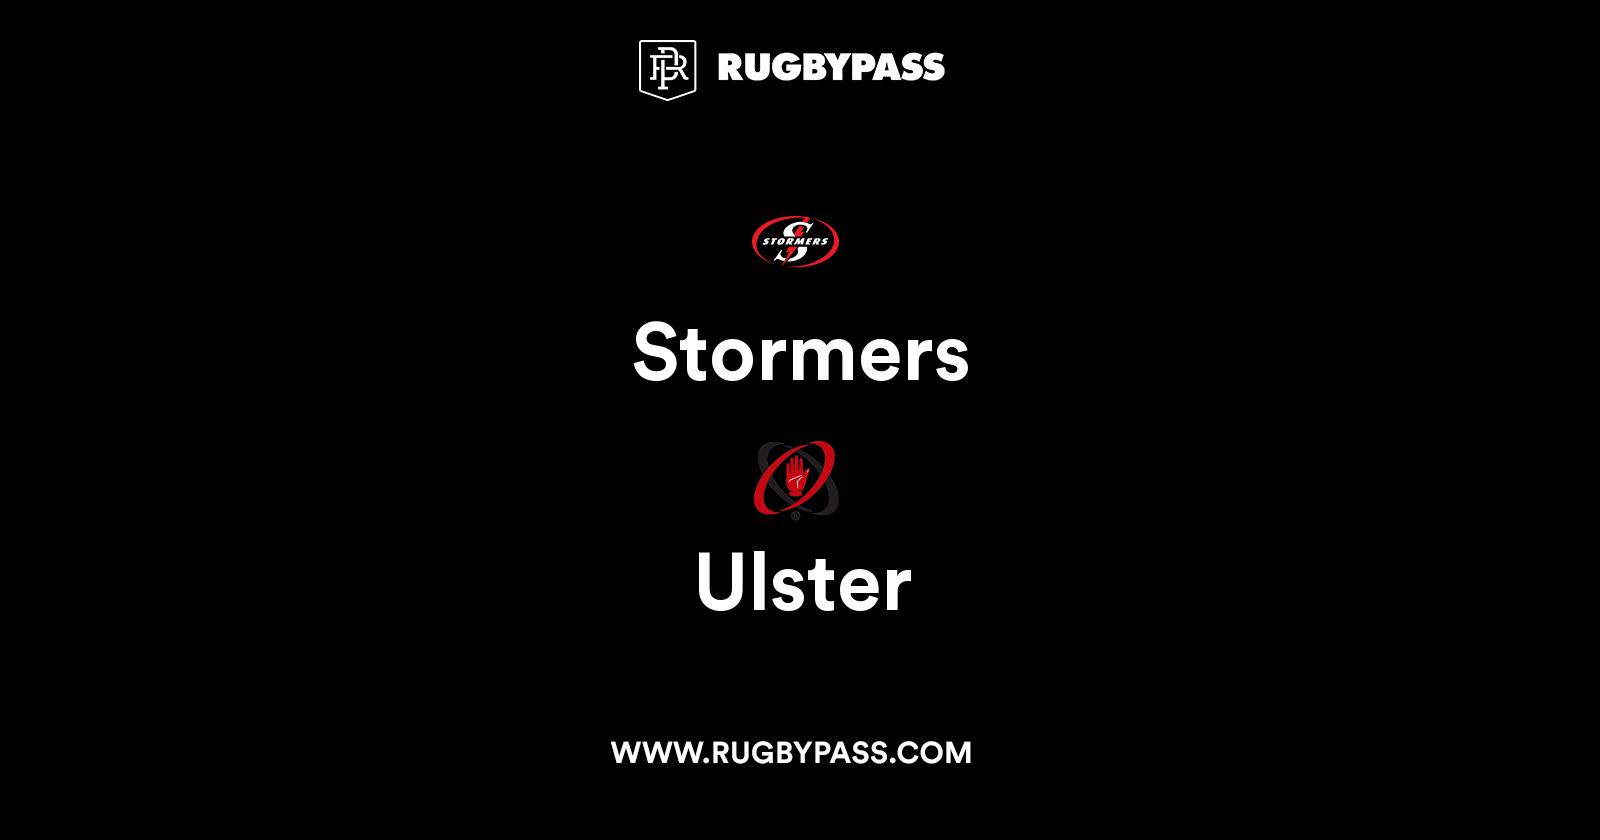 Stormers vs Ulster Live and Latest Rugby Union Scores and Results RugbyPass